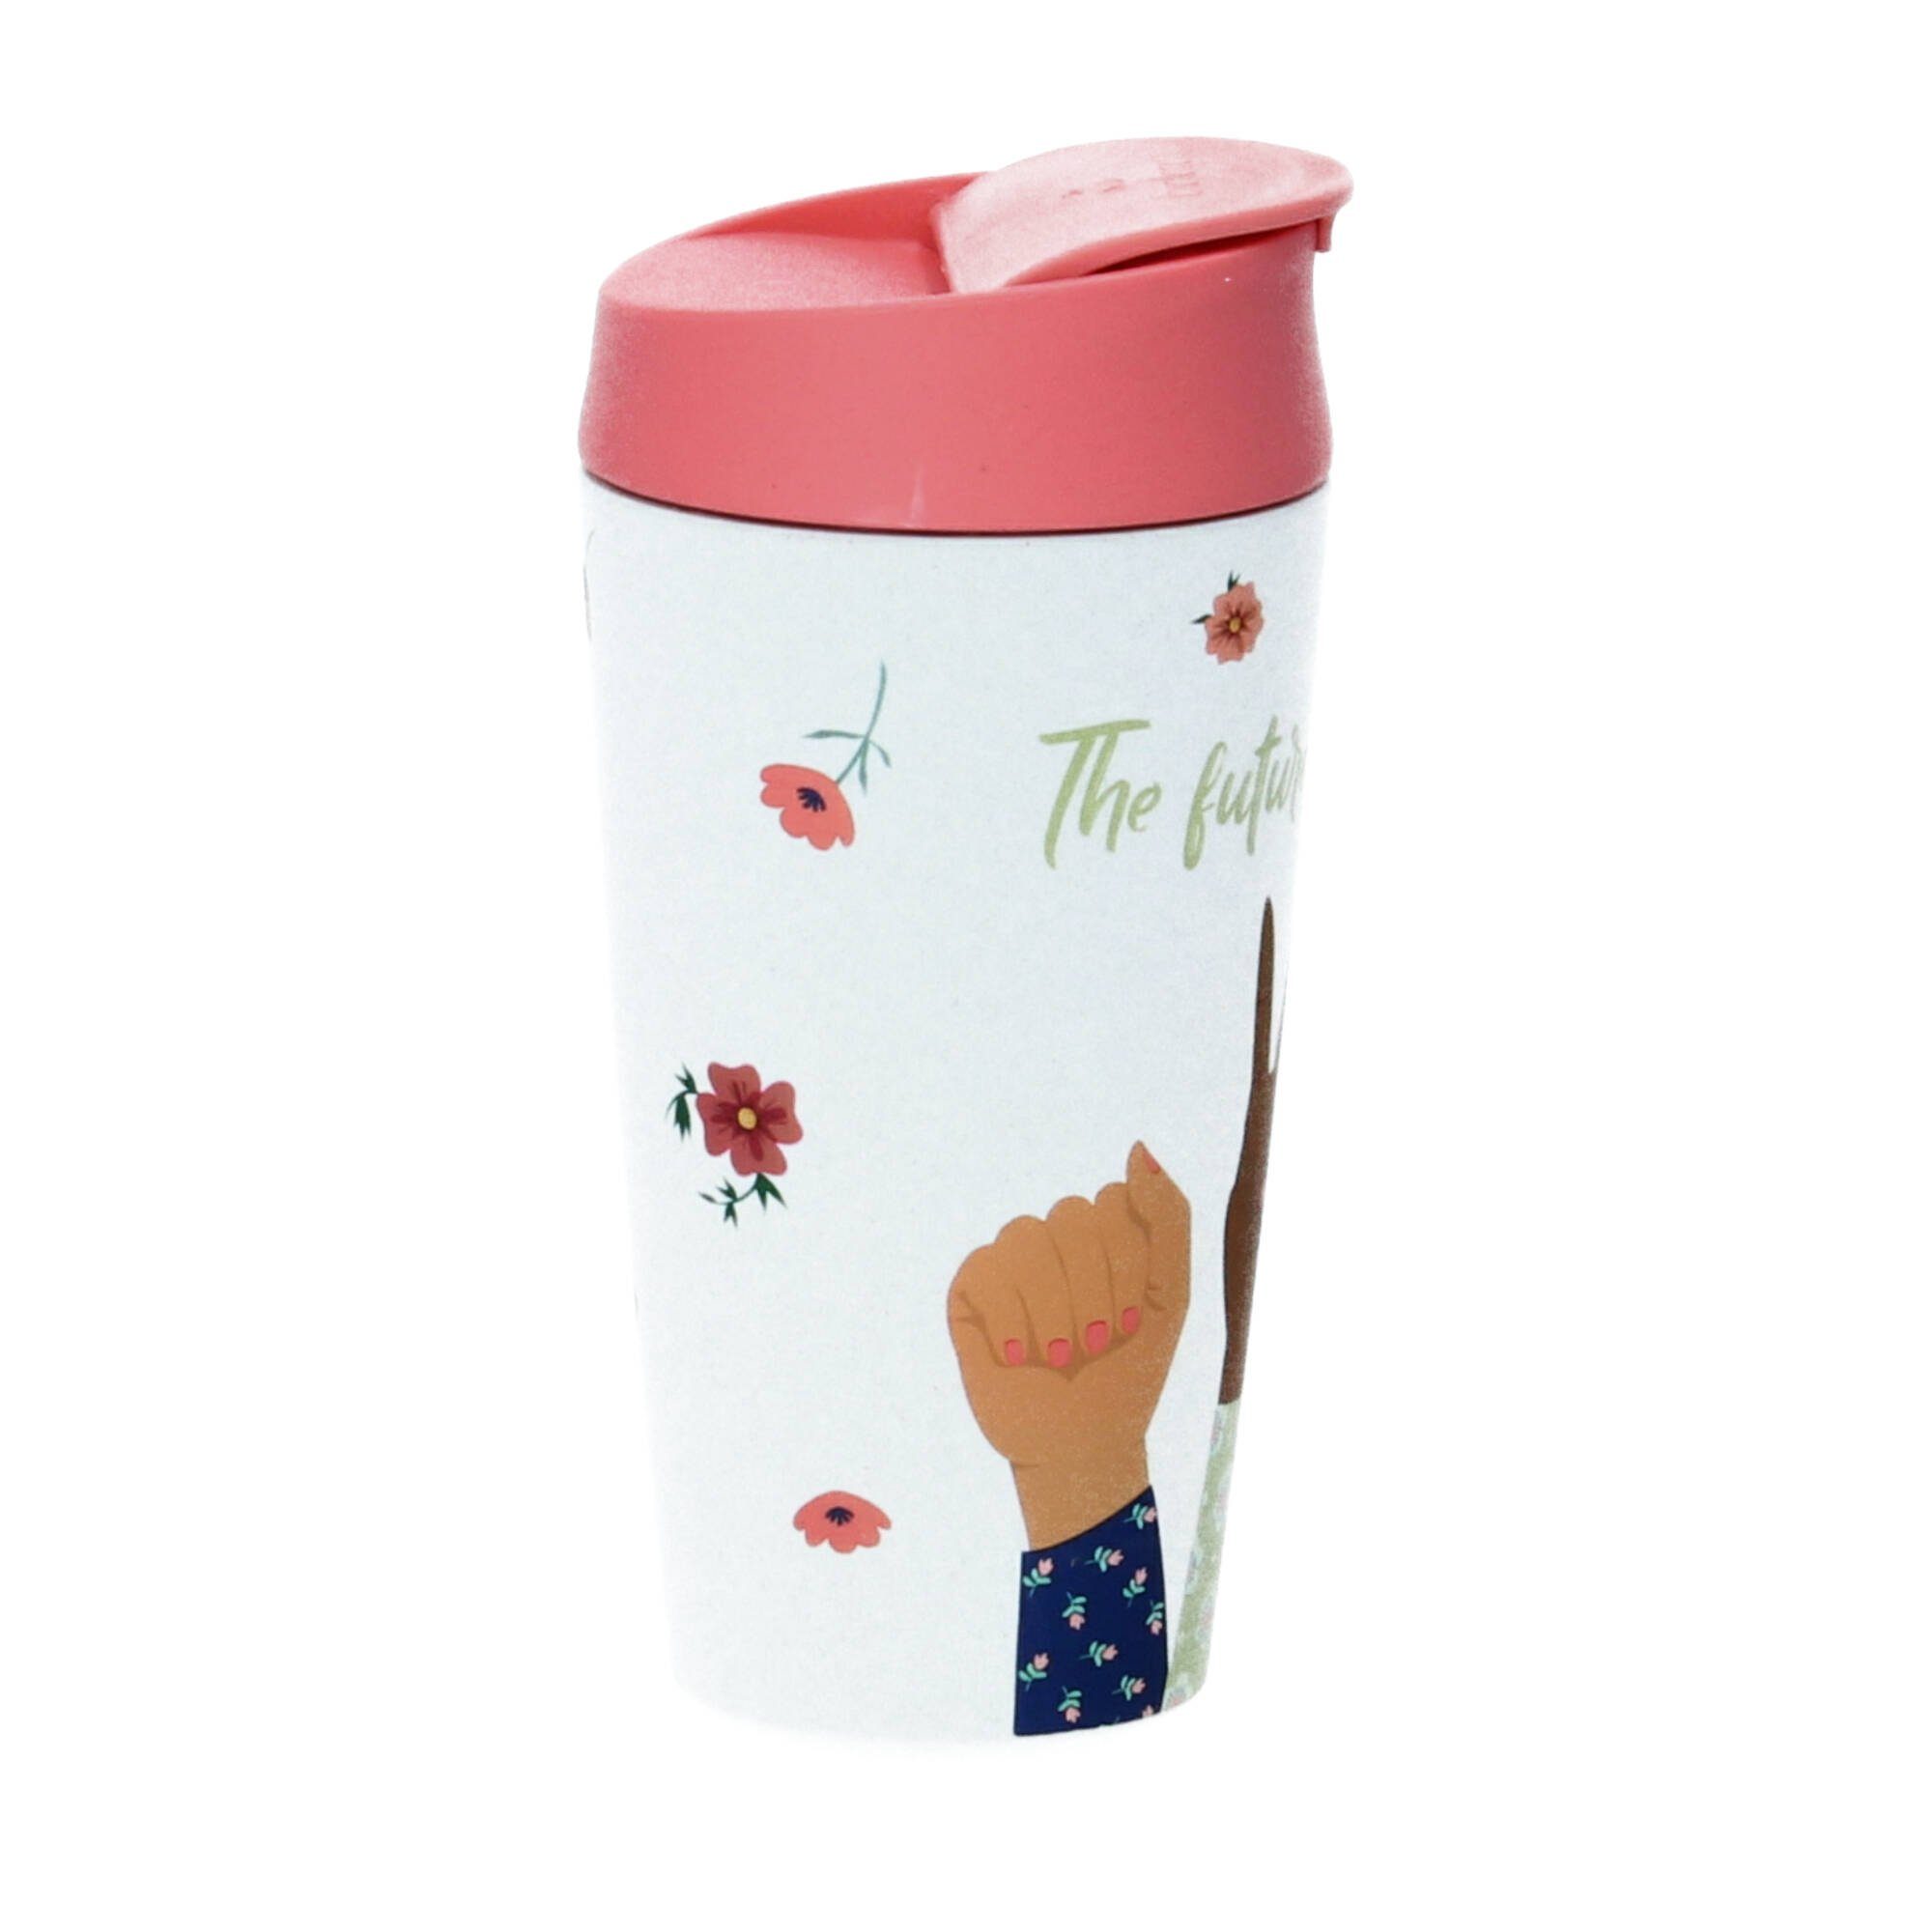 chic mic GmbH cup aus bioloco ml PLA deluxe female, 420 Pflanzenzucker) plant Coffee-to-go-Becher (Kunststoff future is